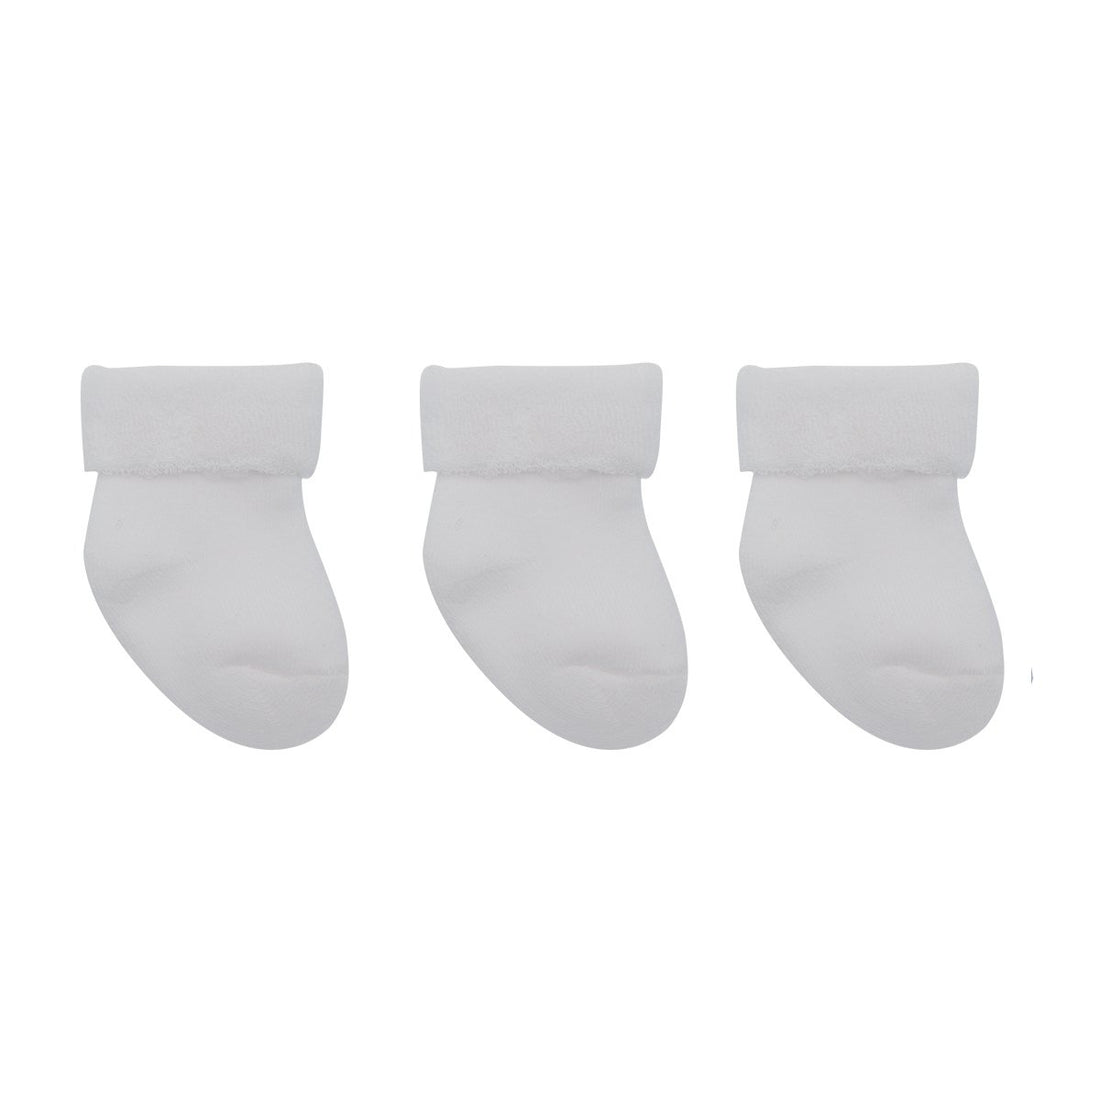 cambrass-set-3-socks-for-baby-liso-white-1718-rjc-42633- (1)